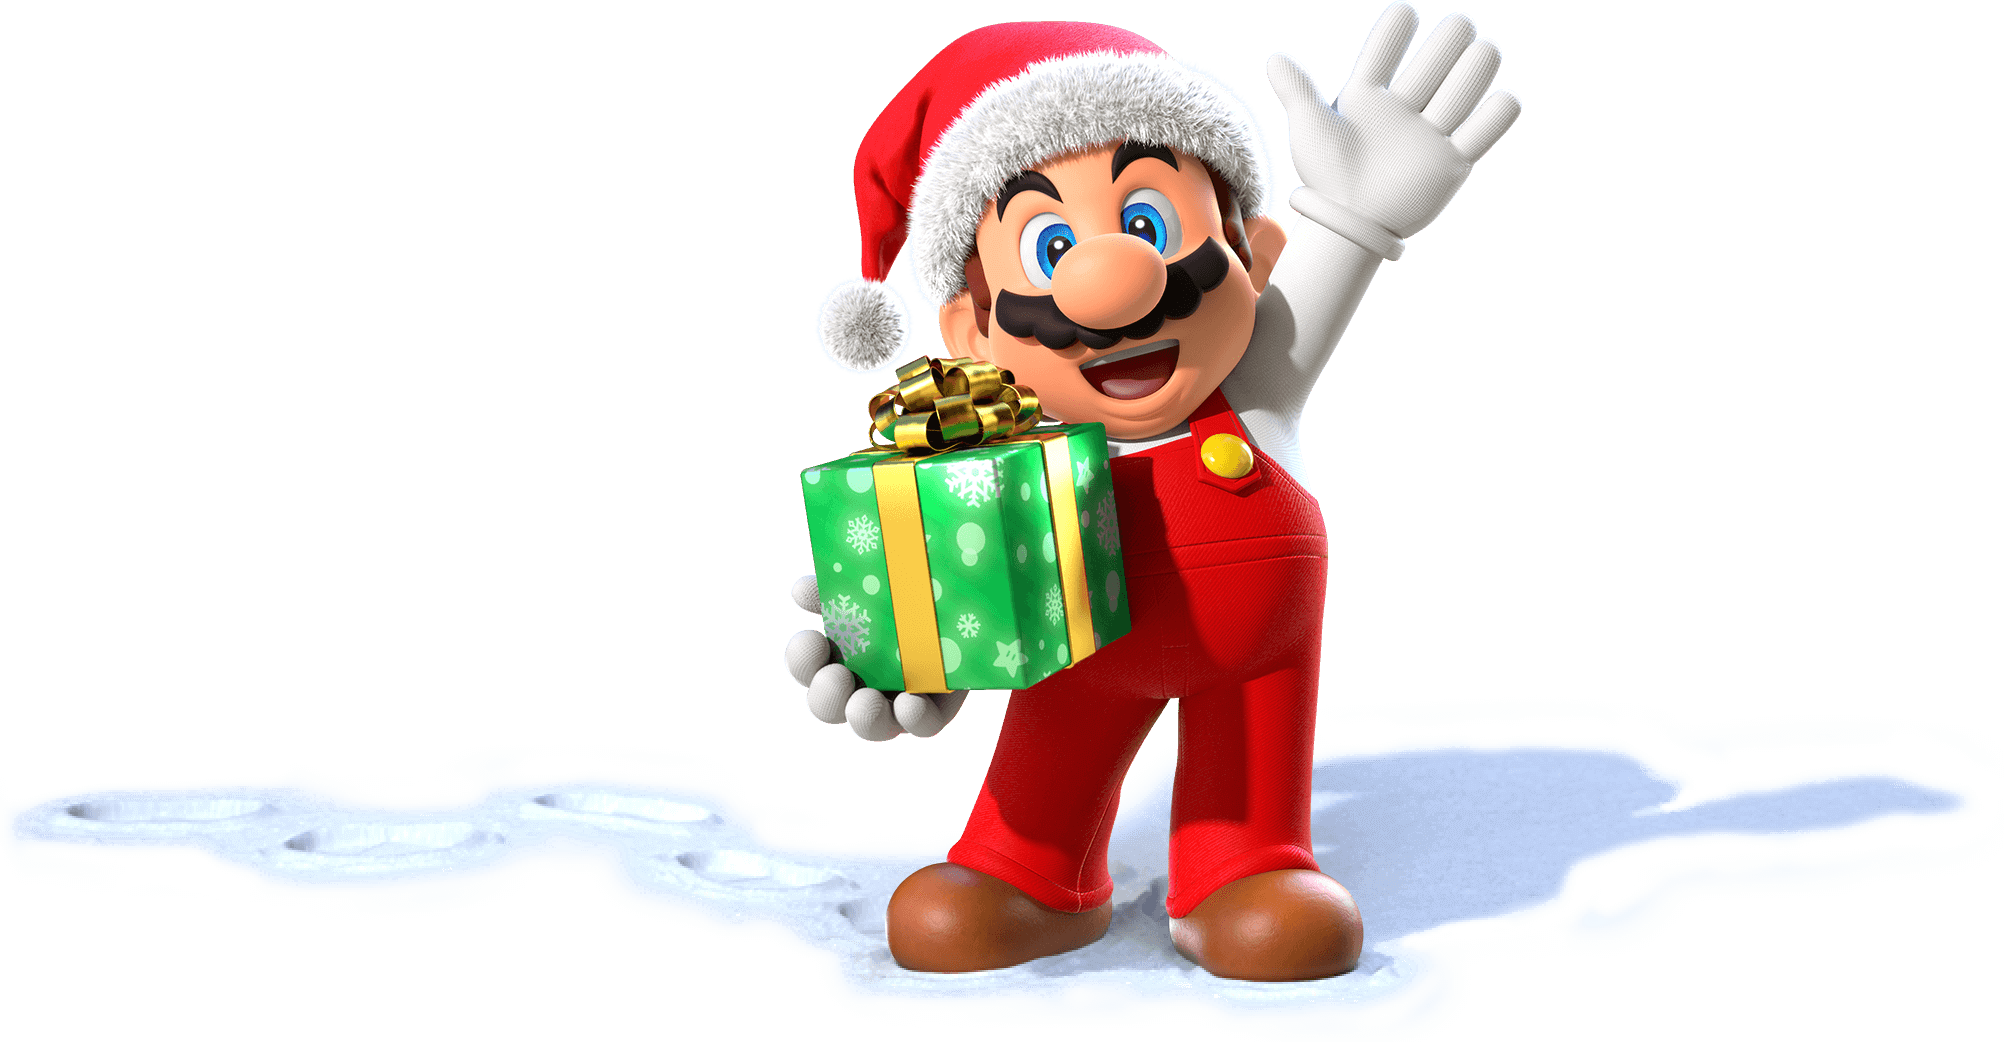 Merry Christmas from Mario!